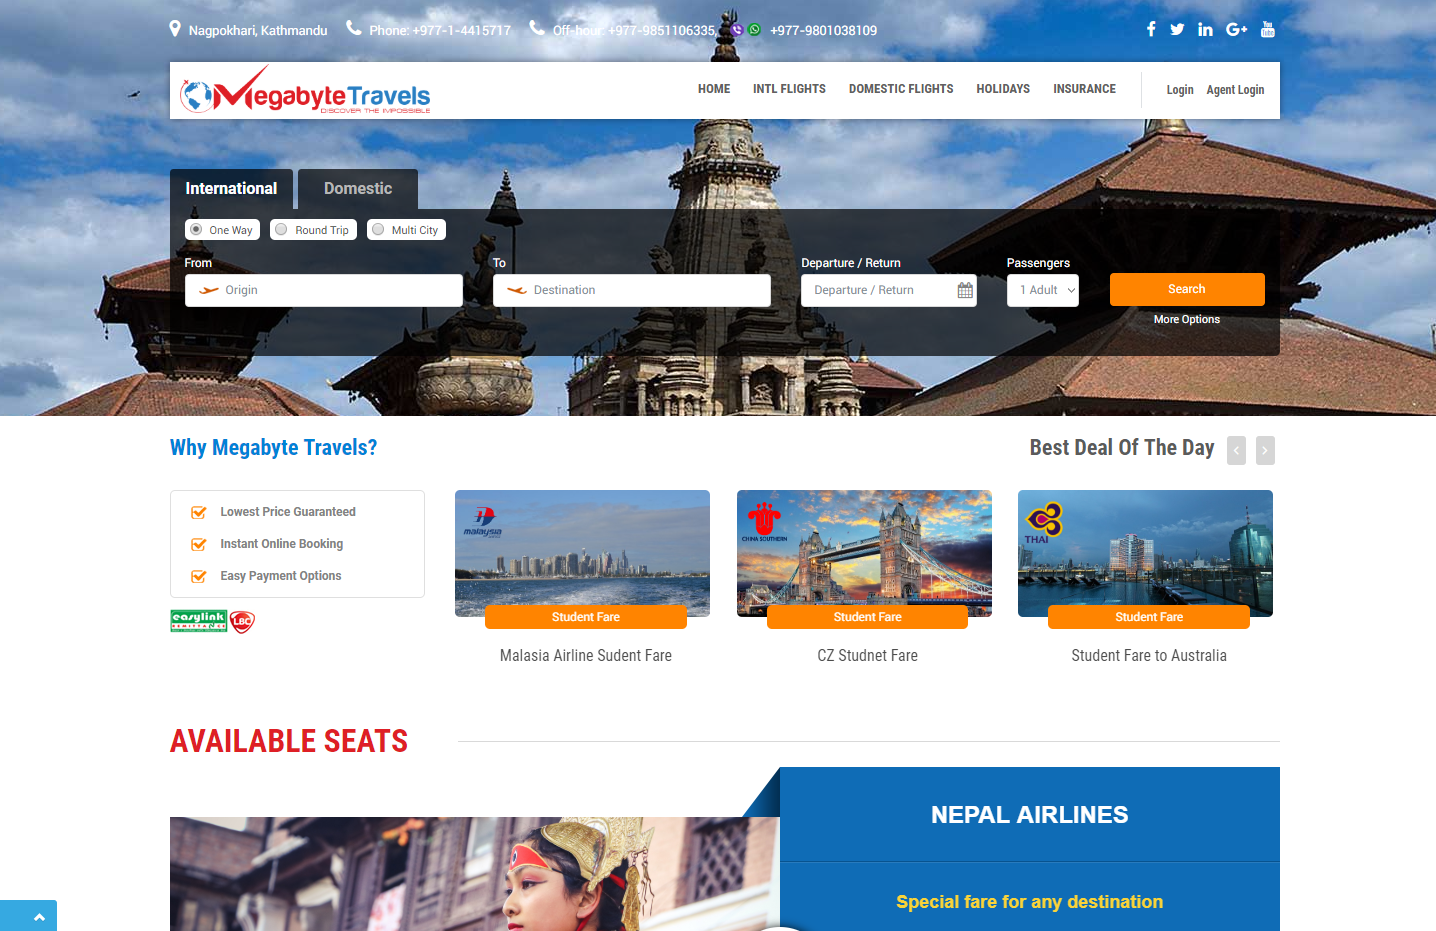 Megabyte Travels: All in One Travel Portal with Domestic & International Flight Booking Website!